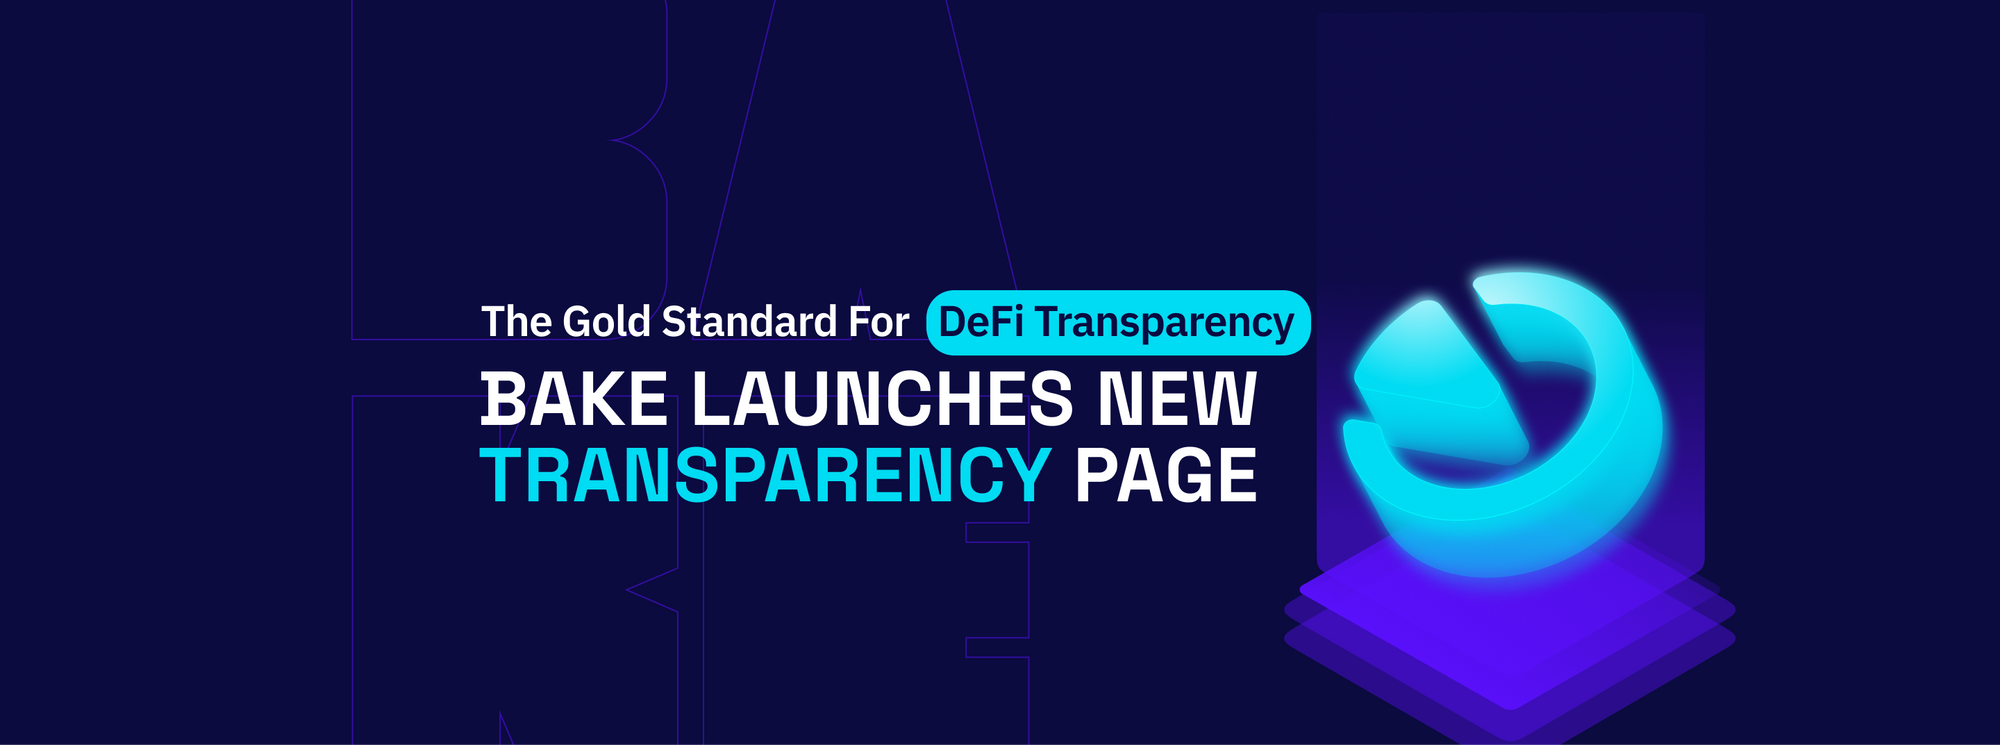 The Gold Standard For DeFi Transparency: Bake Launches New Transparency Page